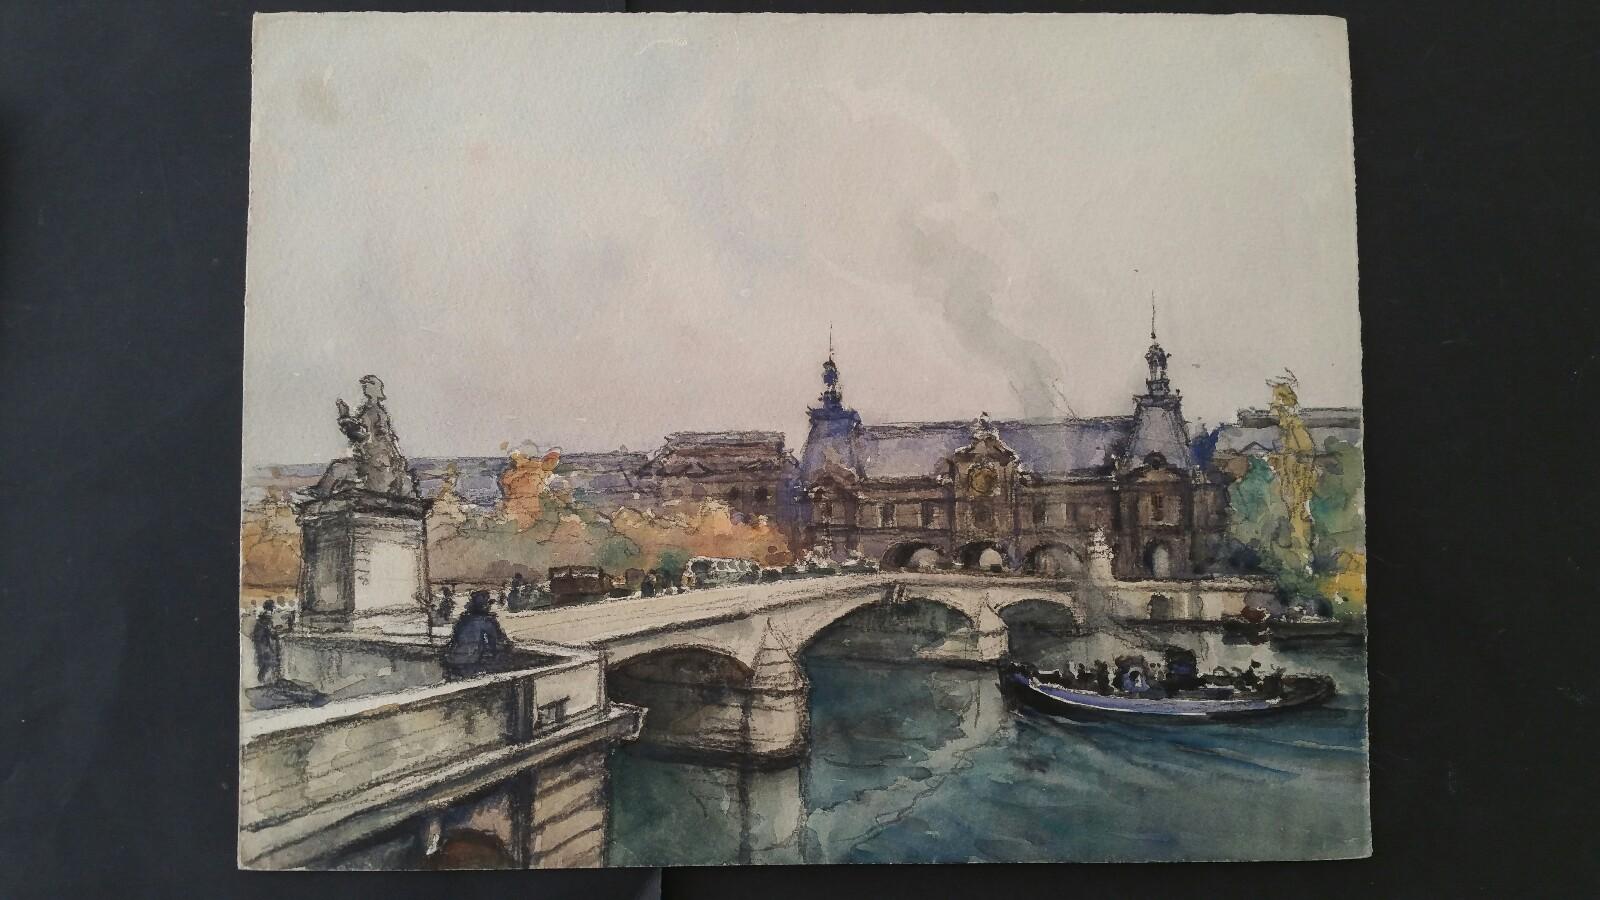 Paris: A Collection of Four Paintings of Paris Bridges
by Henri Miloch (1898-1979)
Three are signed lower right, one (with a boat about to pass under a bridge from right to left) is unsigned.
watercolour and gouache painting on artist's paper,